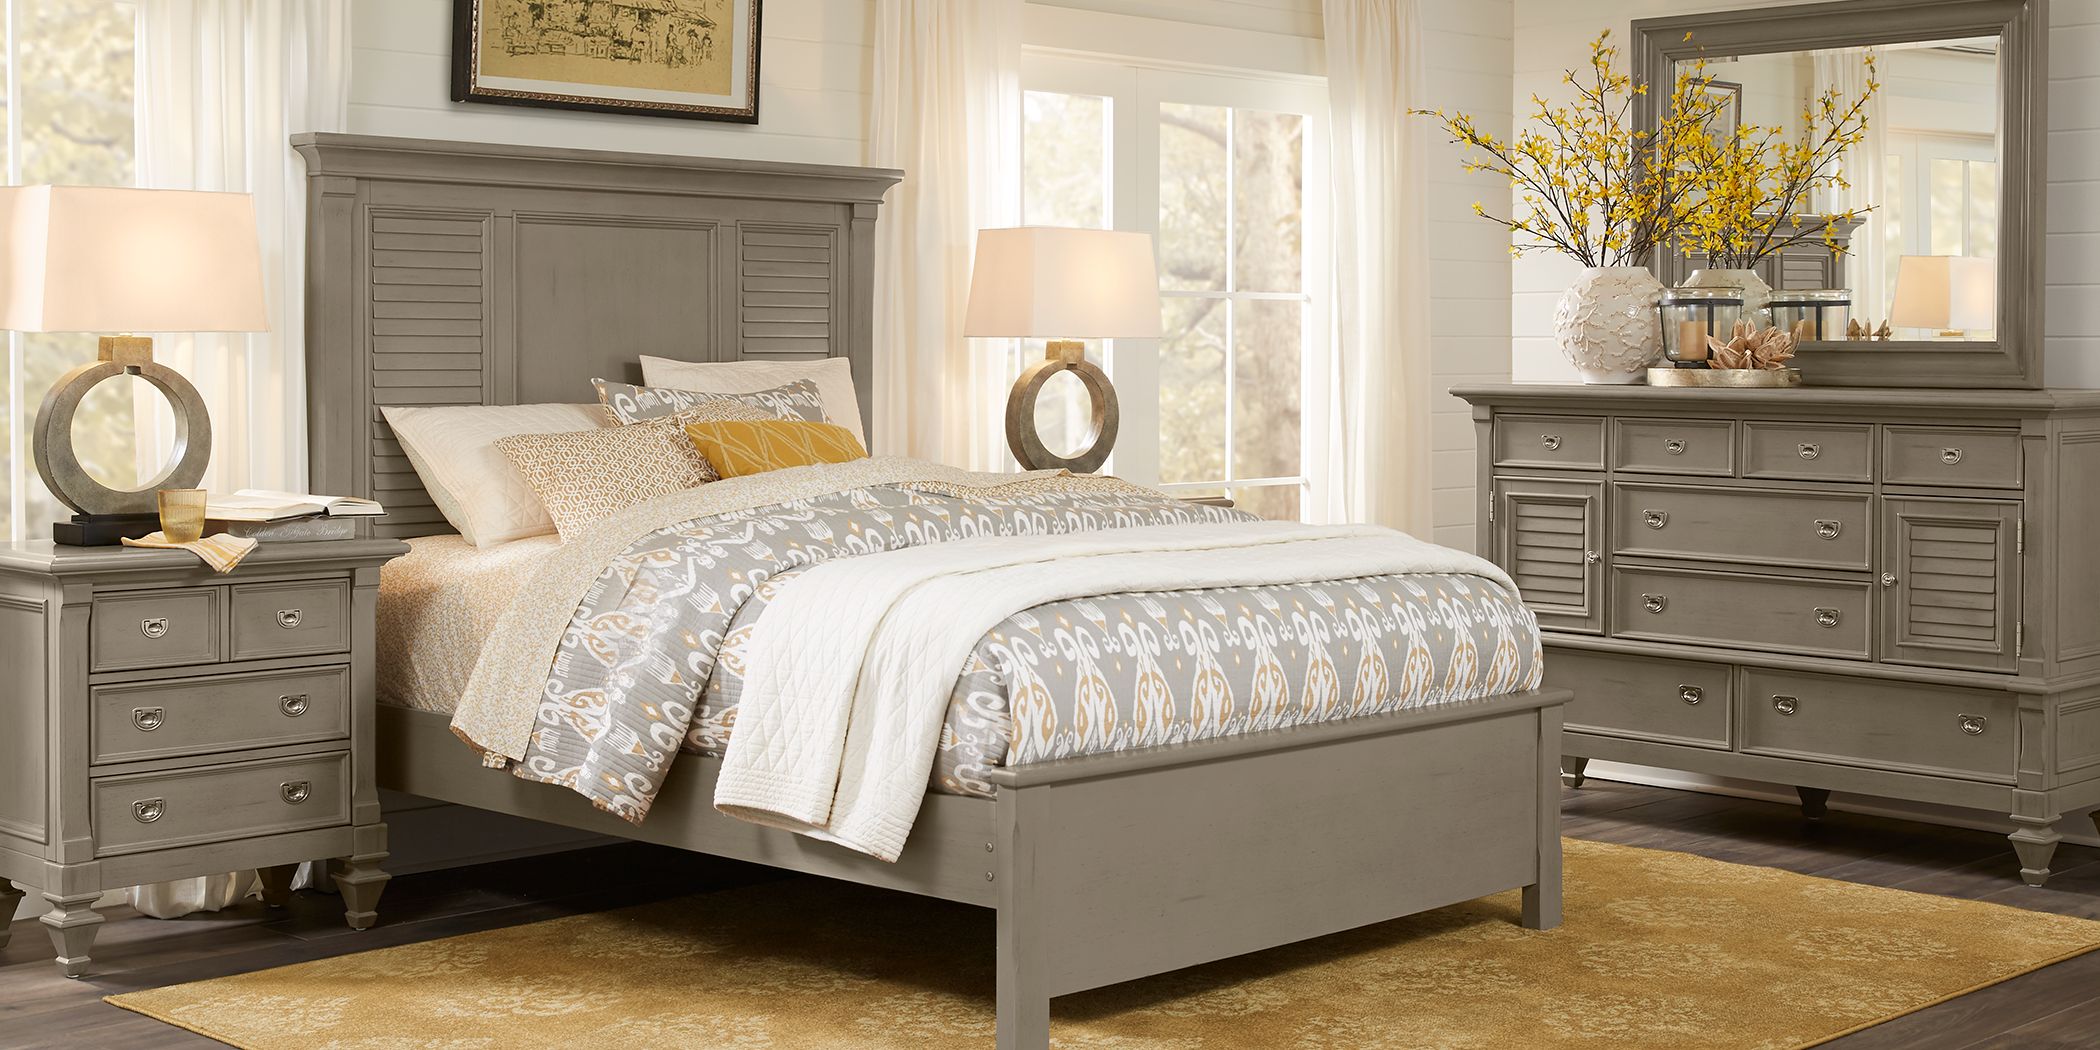 Discount Bedroom Furniture Rooms To Go Outlet